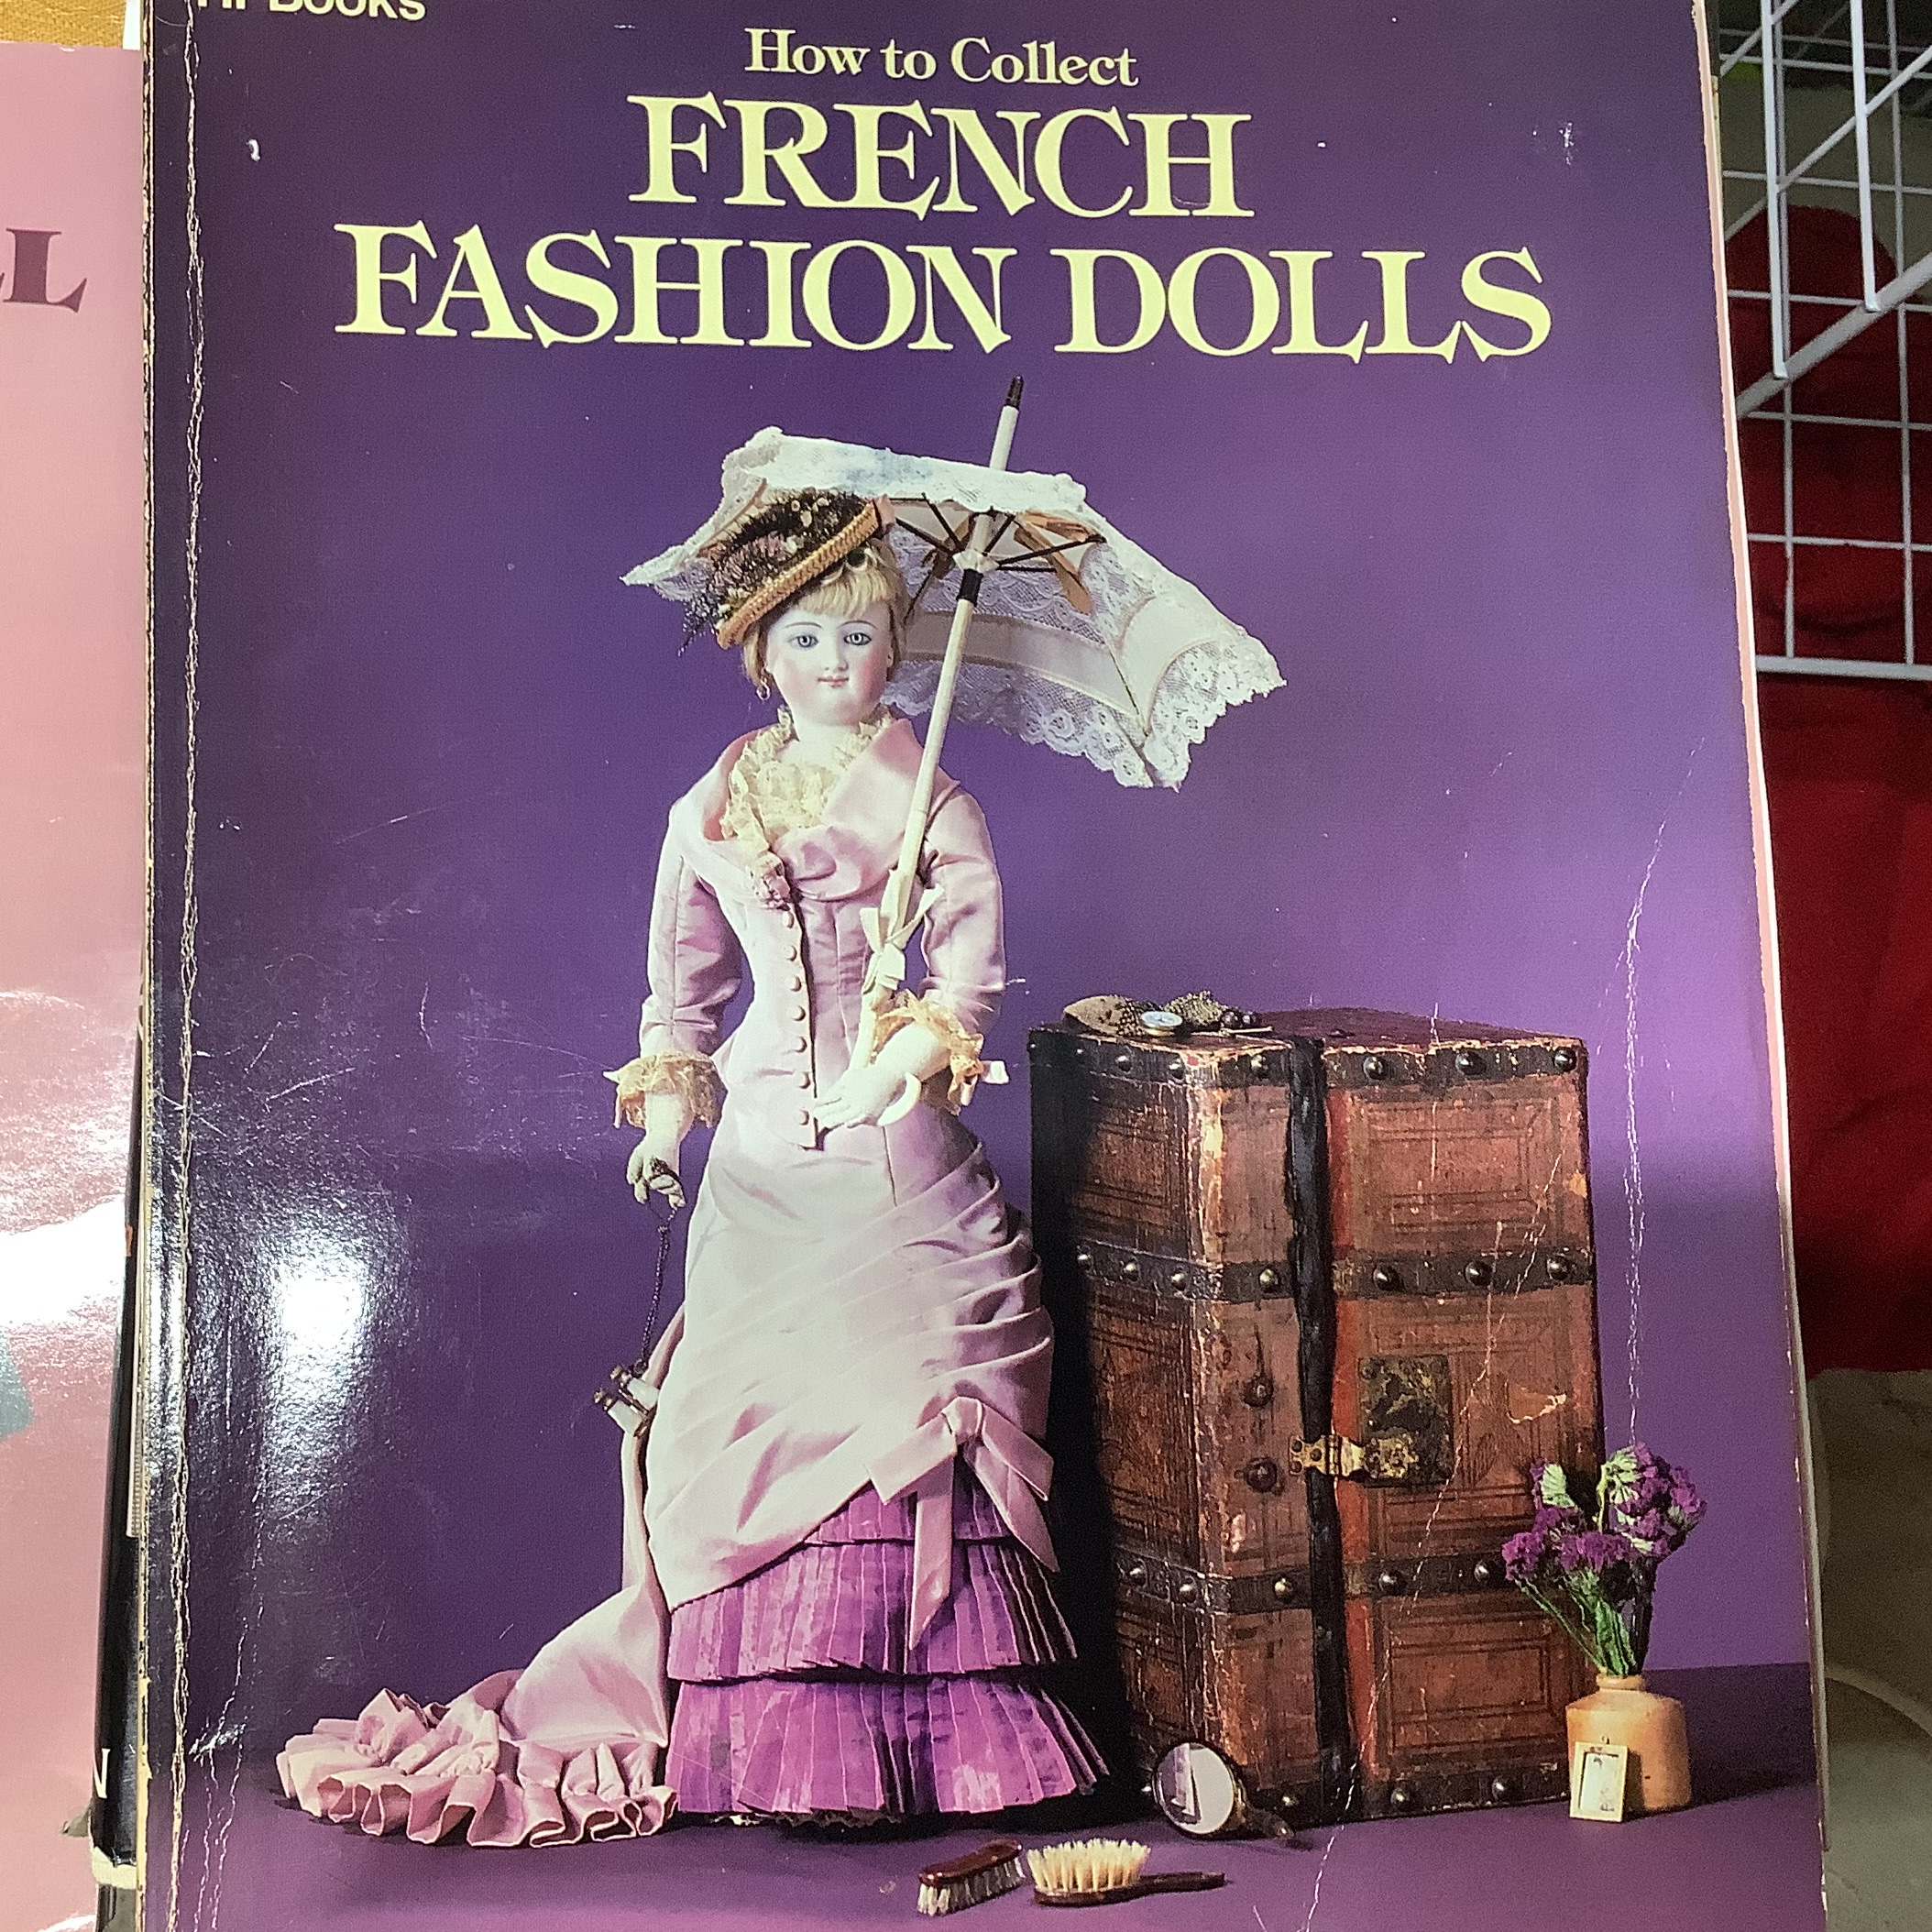 Hardcover book depicting a lady doll holding a parasol